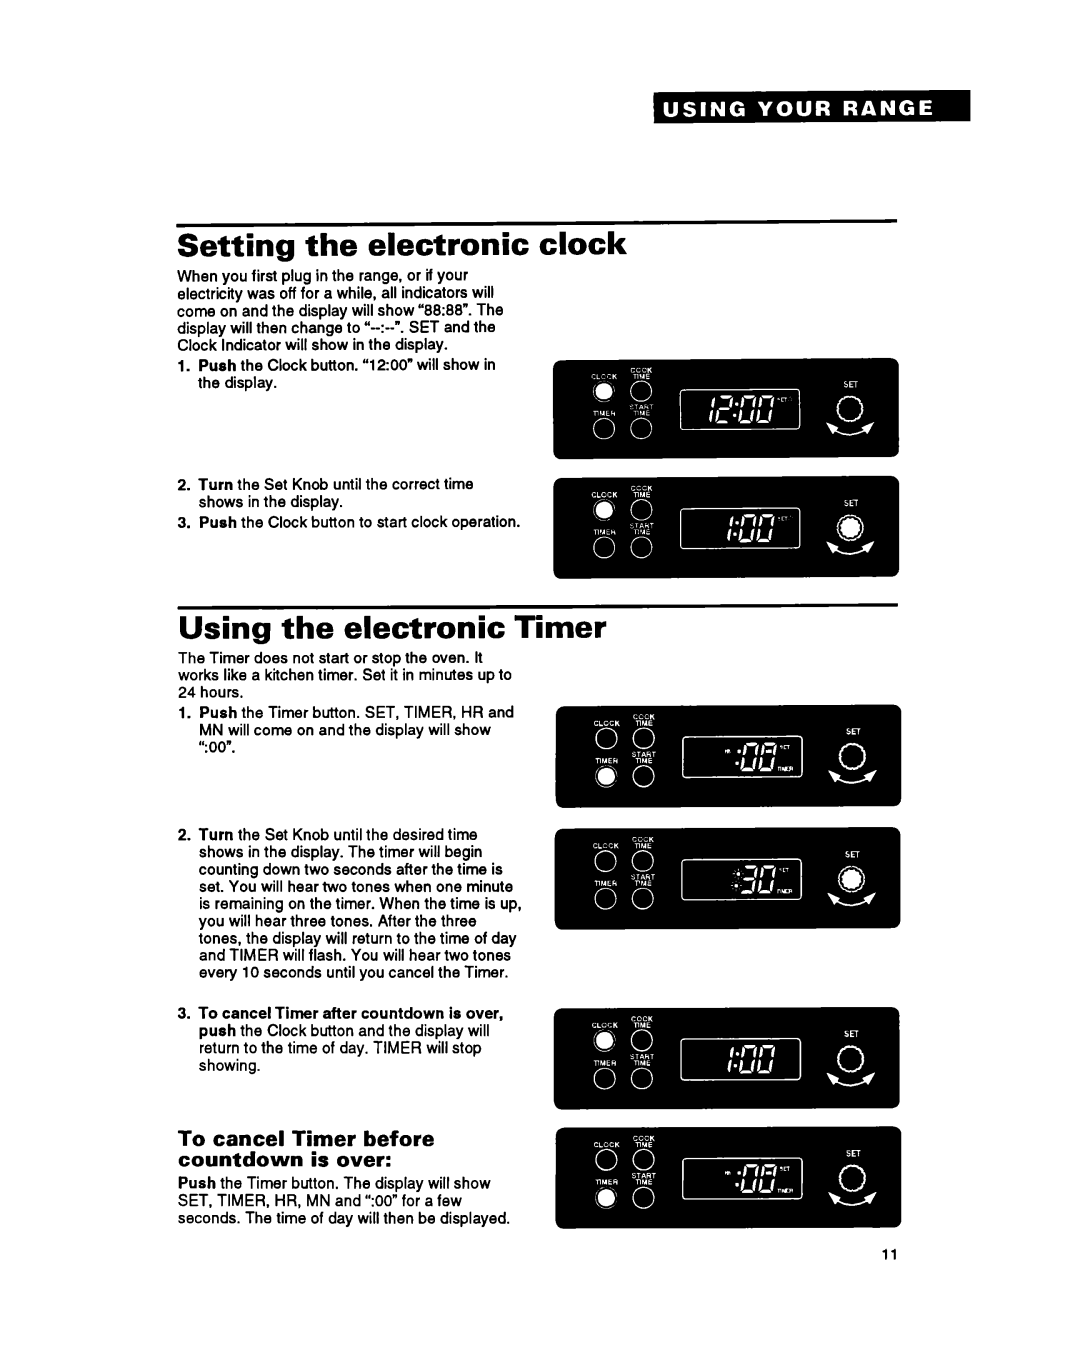 Whirlpool FES310Y manual Setting the electronic clock, Using the electronic Timer, To cancel Timer before countdown is over 